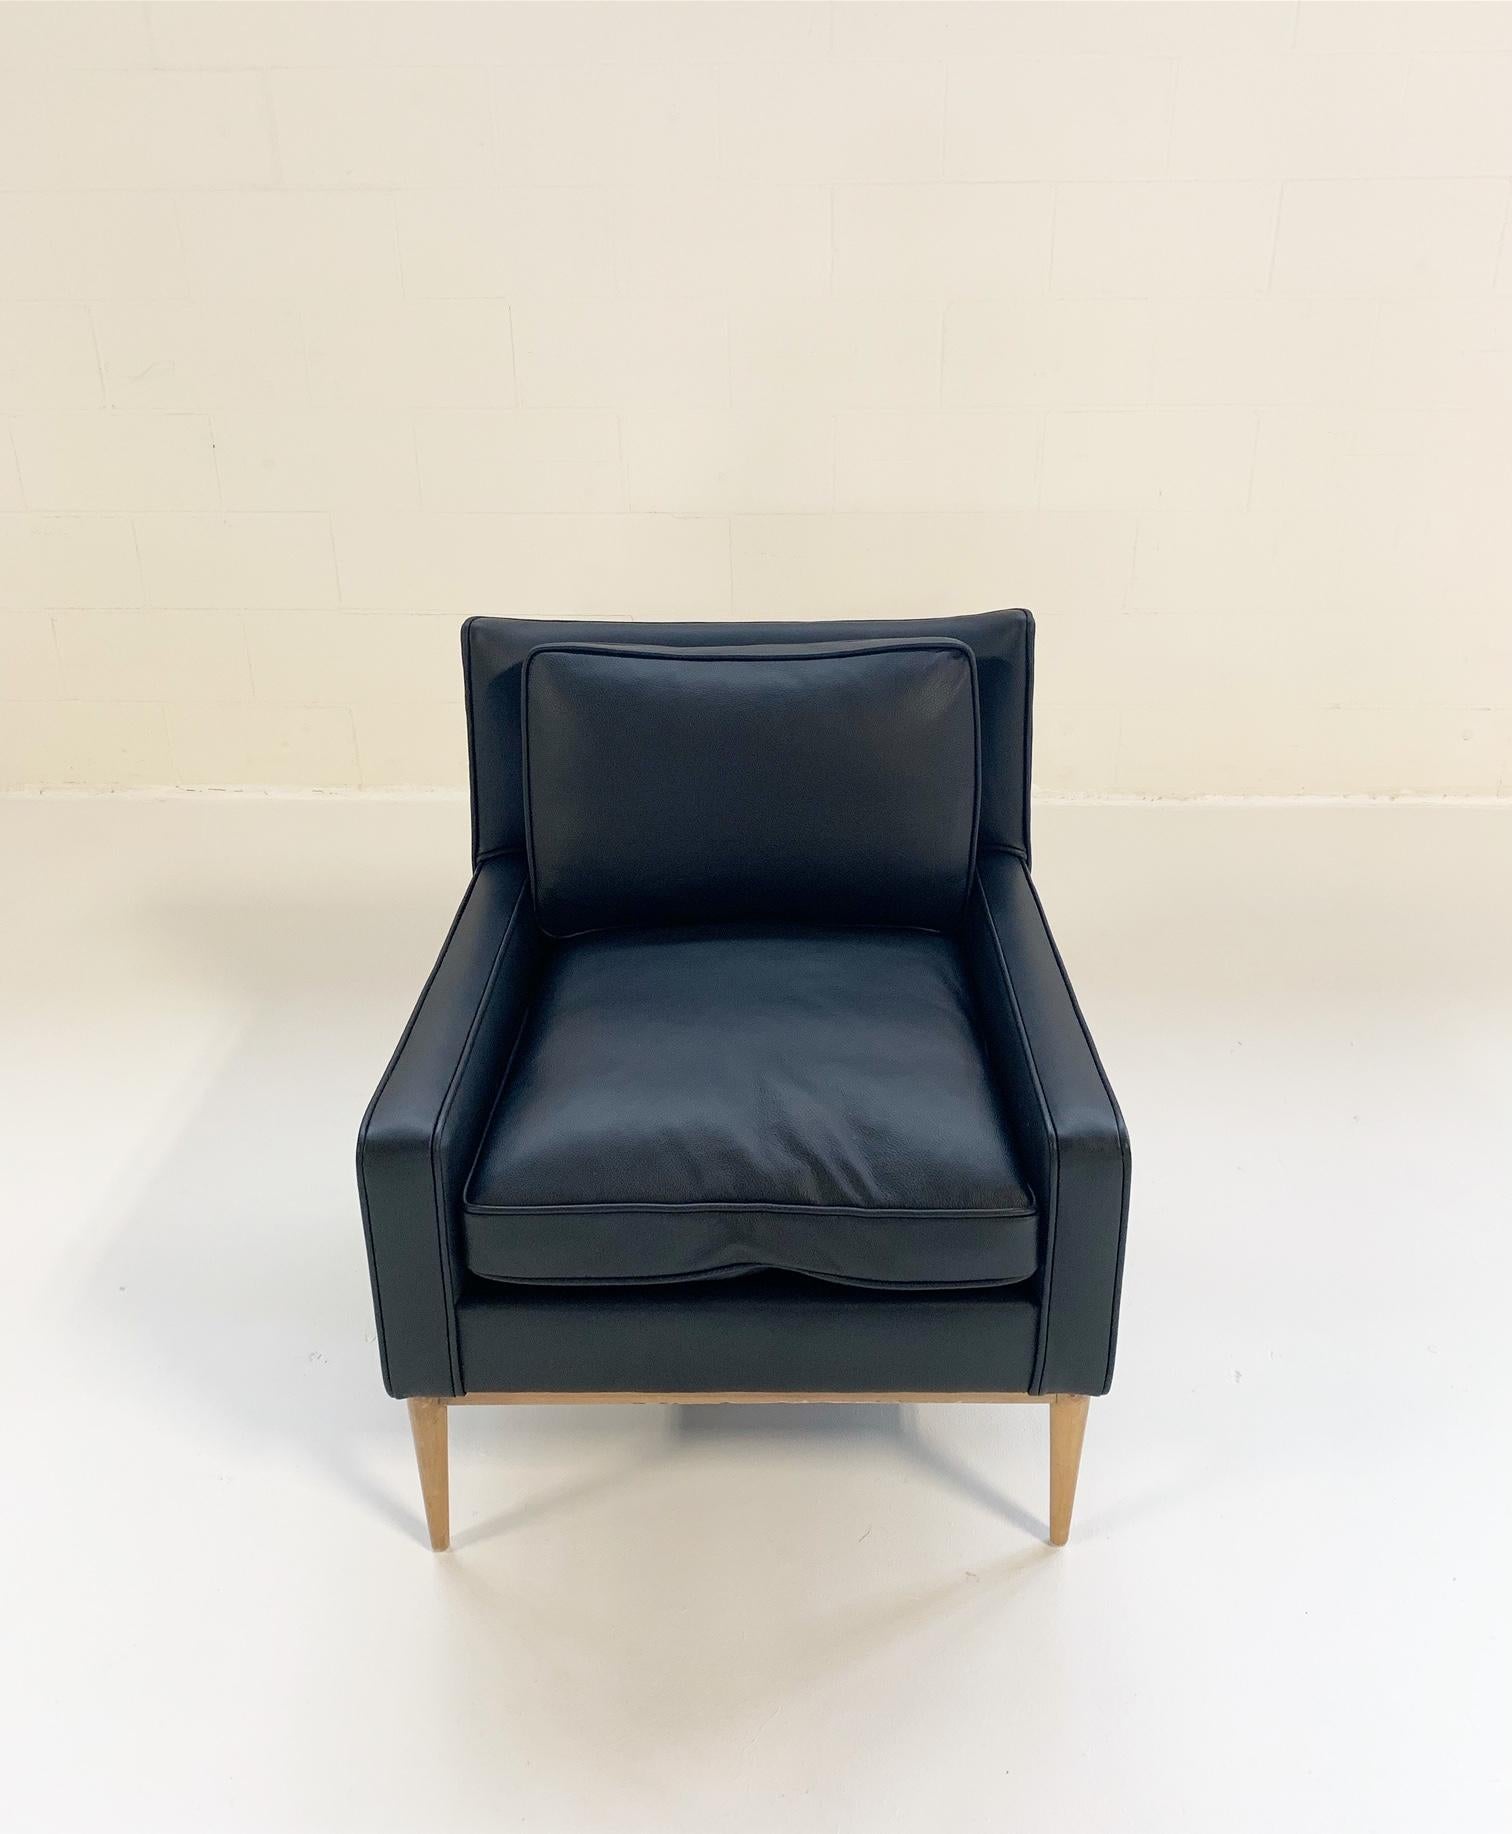 Paul McCobb's modern take on traditional pieces makes him a favorite among American mid-century designers. Completely restored and masterfully reupholstered in the most luxurious leather from renowned Italian label, Loro Piana, this McCobb lounge